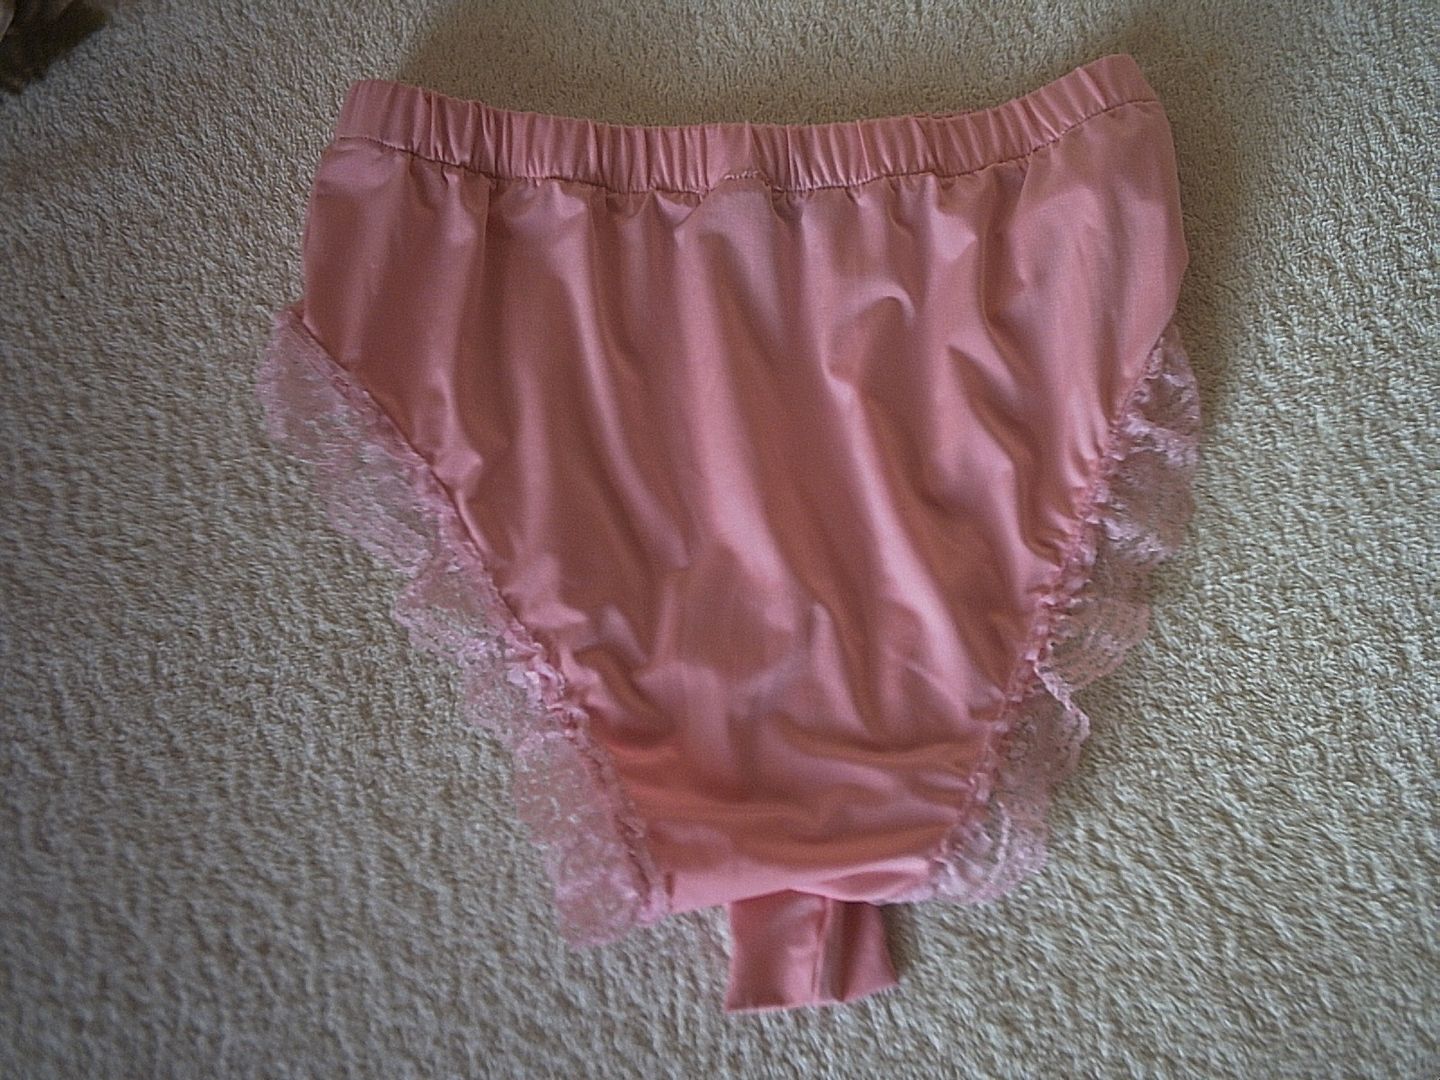 Men's Sissy Baby Pink Silky Stretch Sleeved Panties Cute Frilly Knickers S